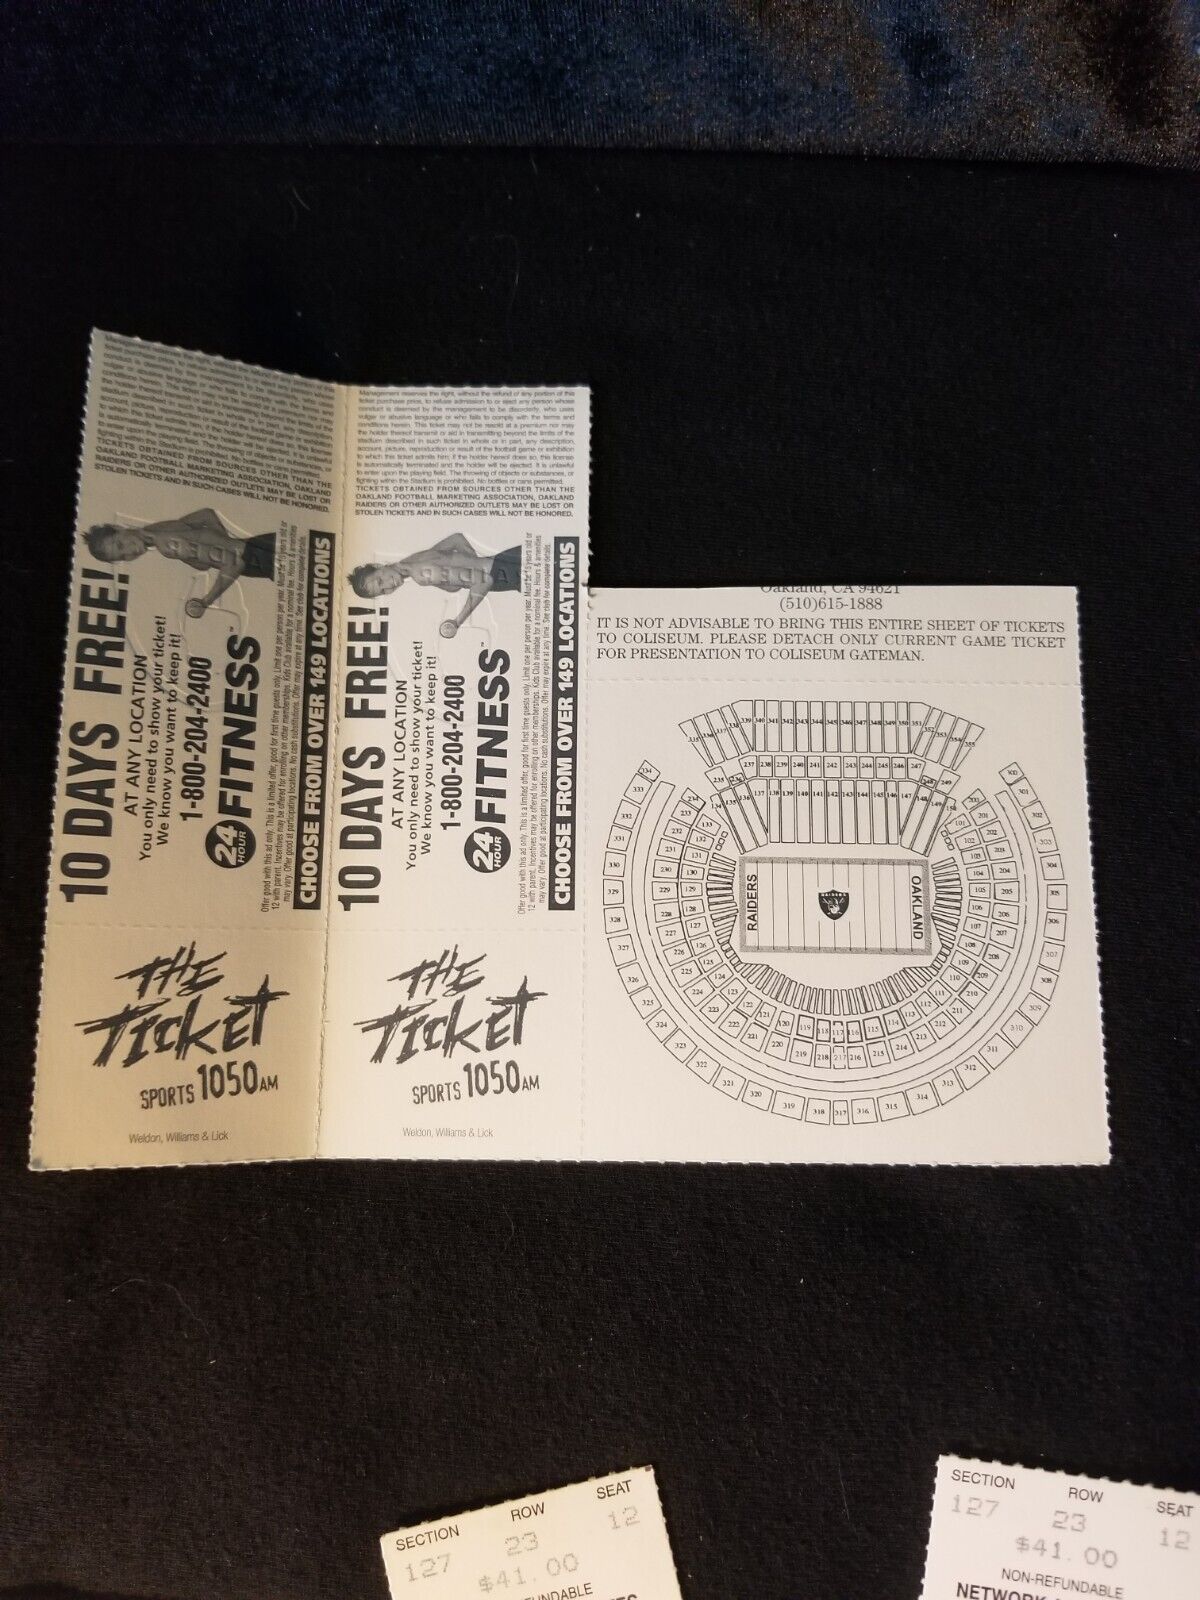 Oakland Raiders Tickets and Stub Lot - 1995, 1997, 1999 - 10 total